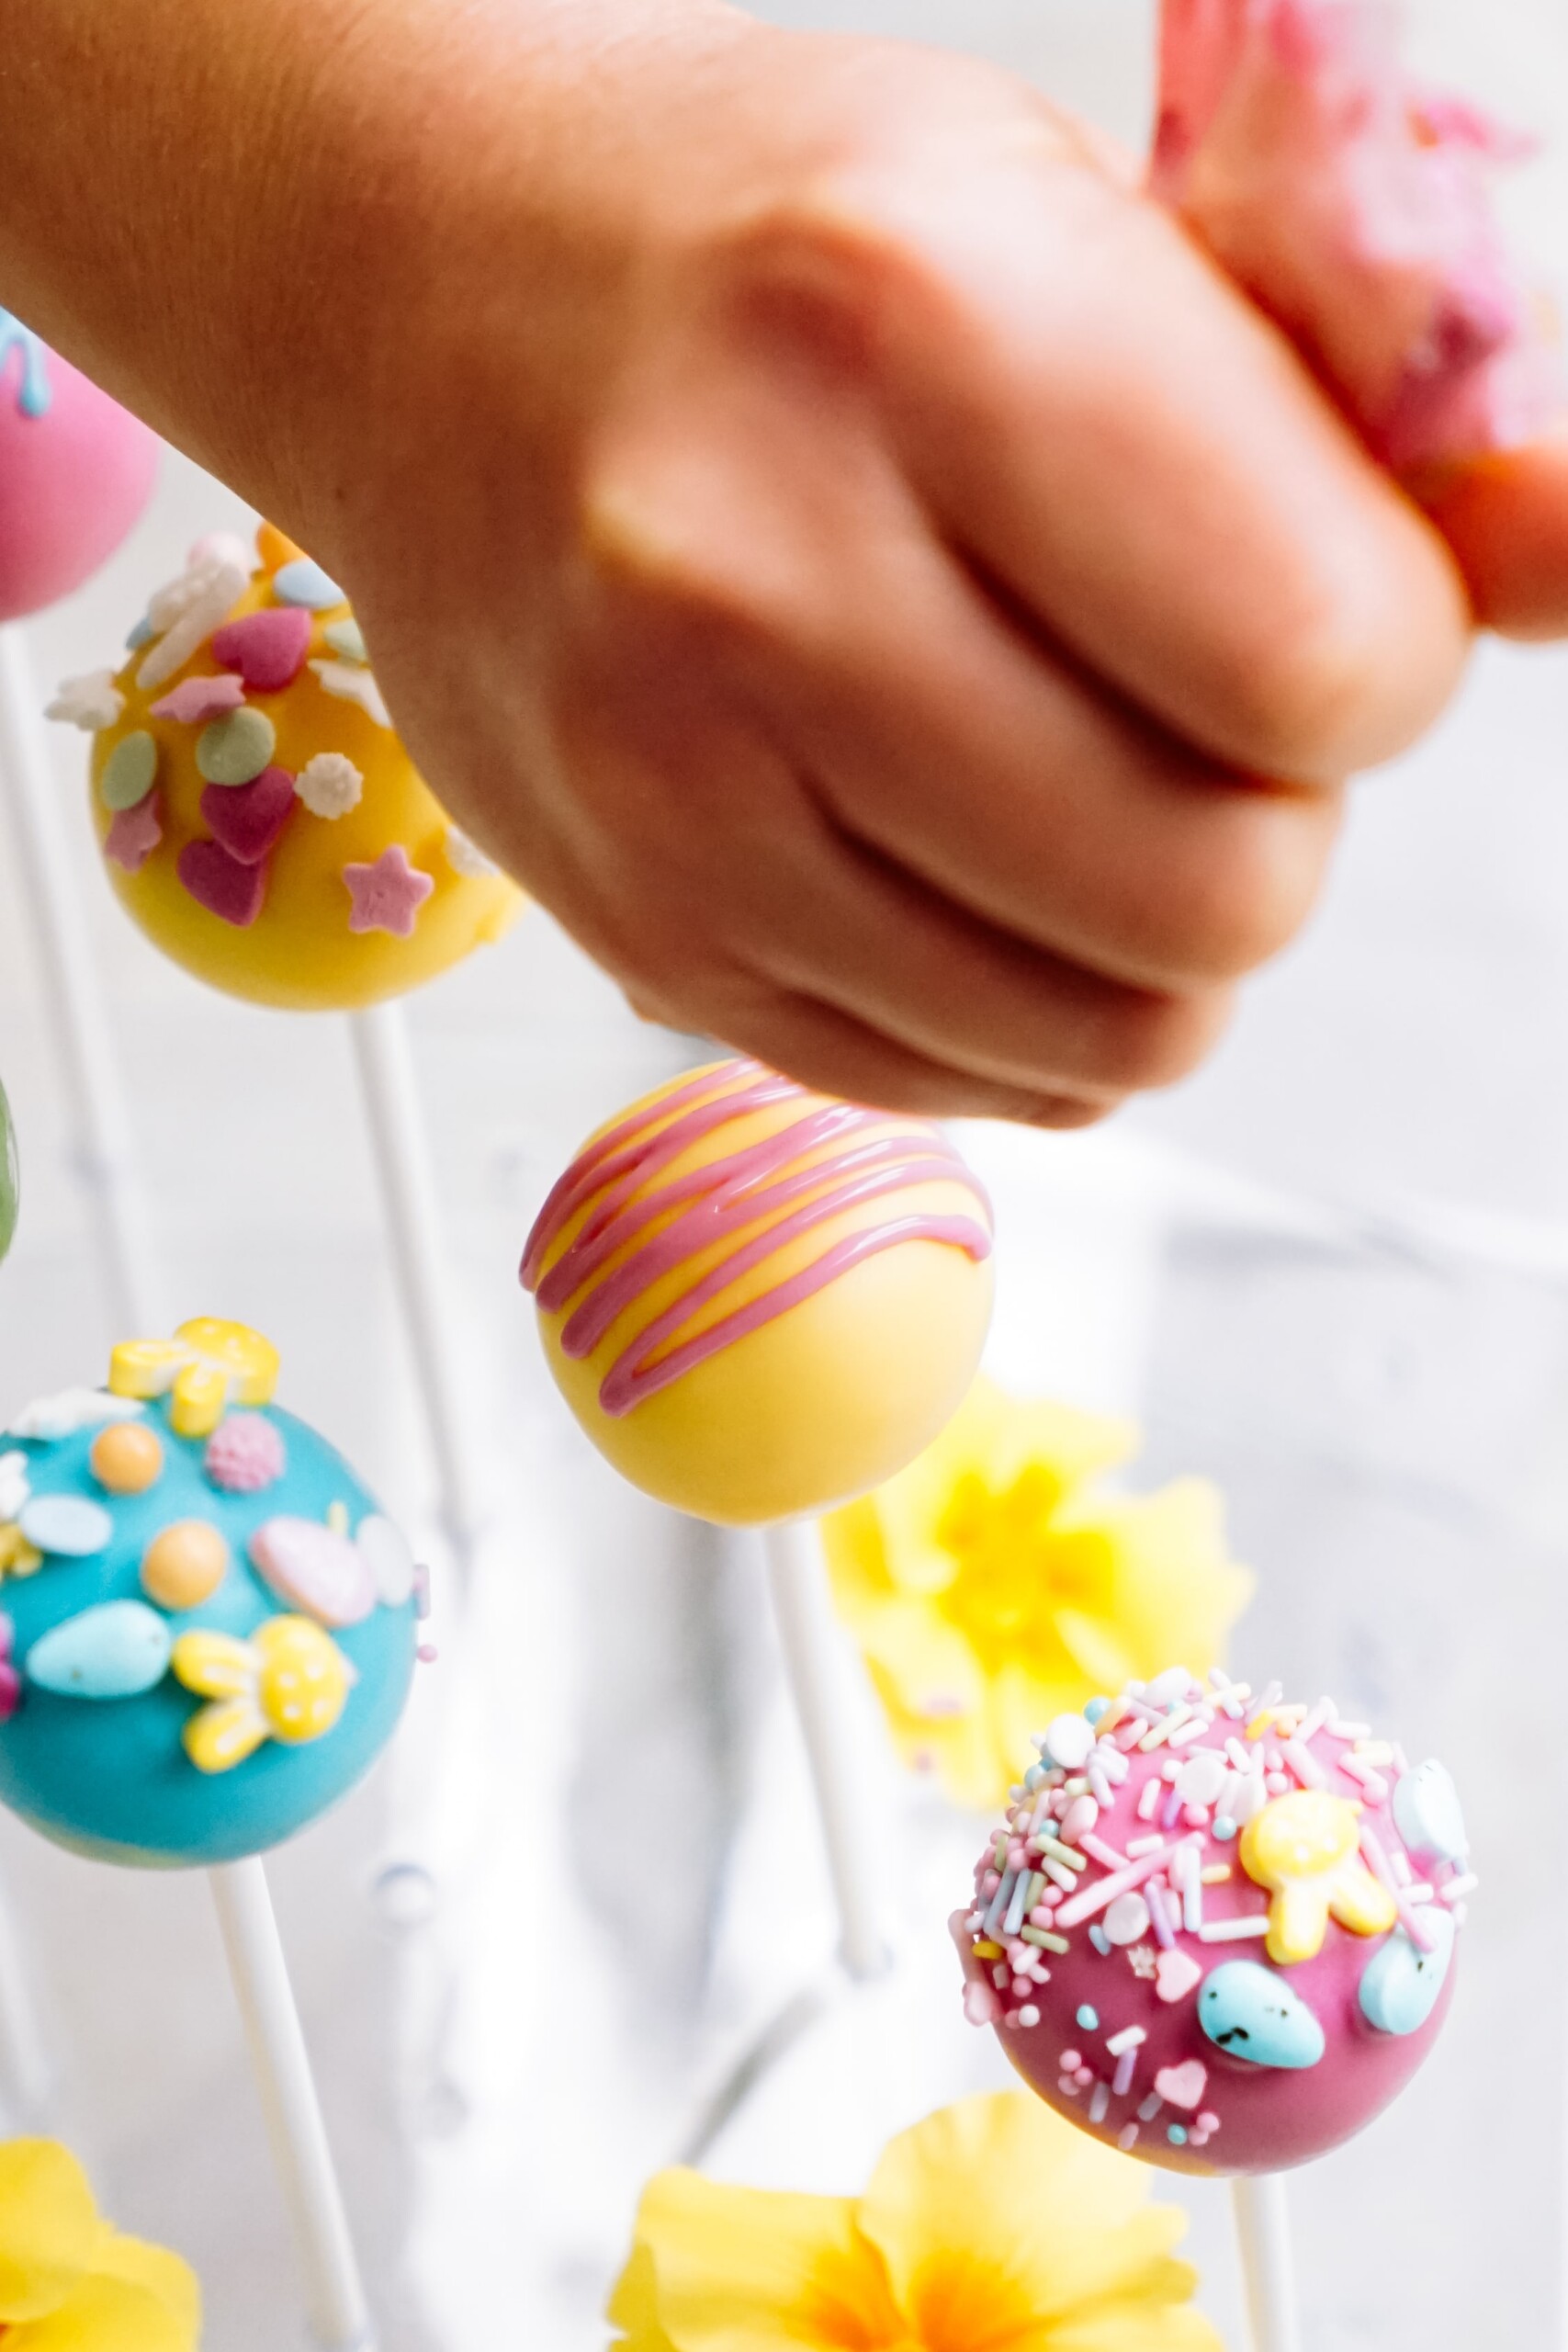 A hand selecting a colorful cake pop from a bouquet of assorted, decorated cake pops.